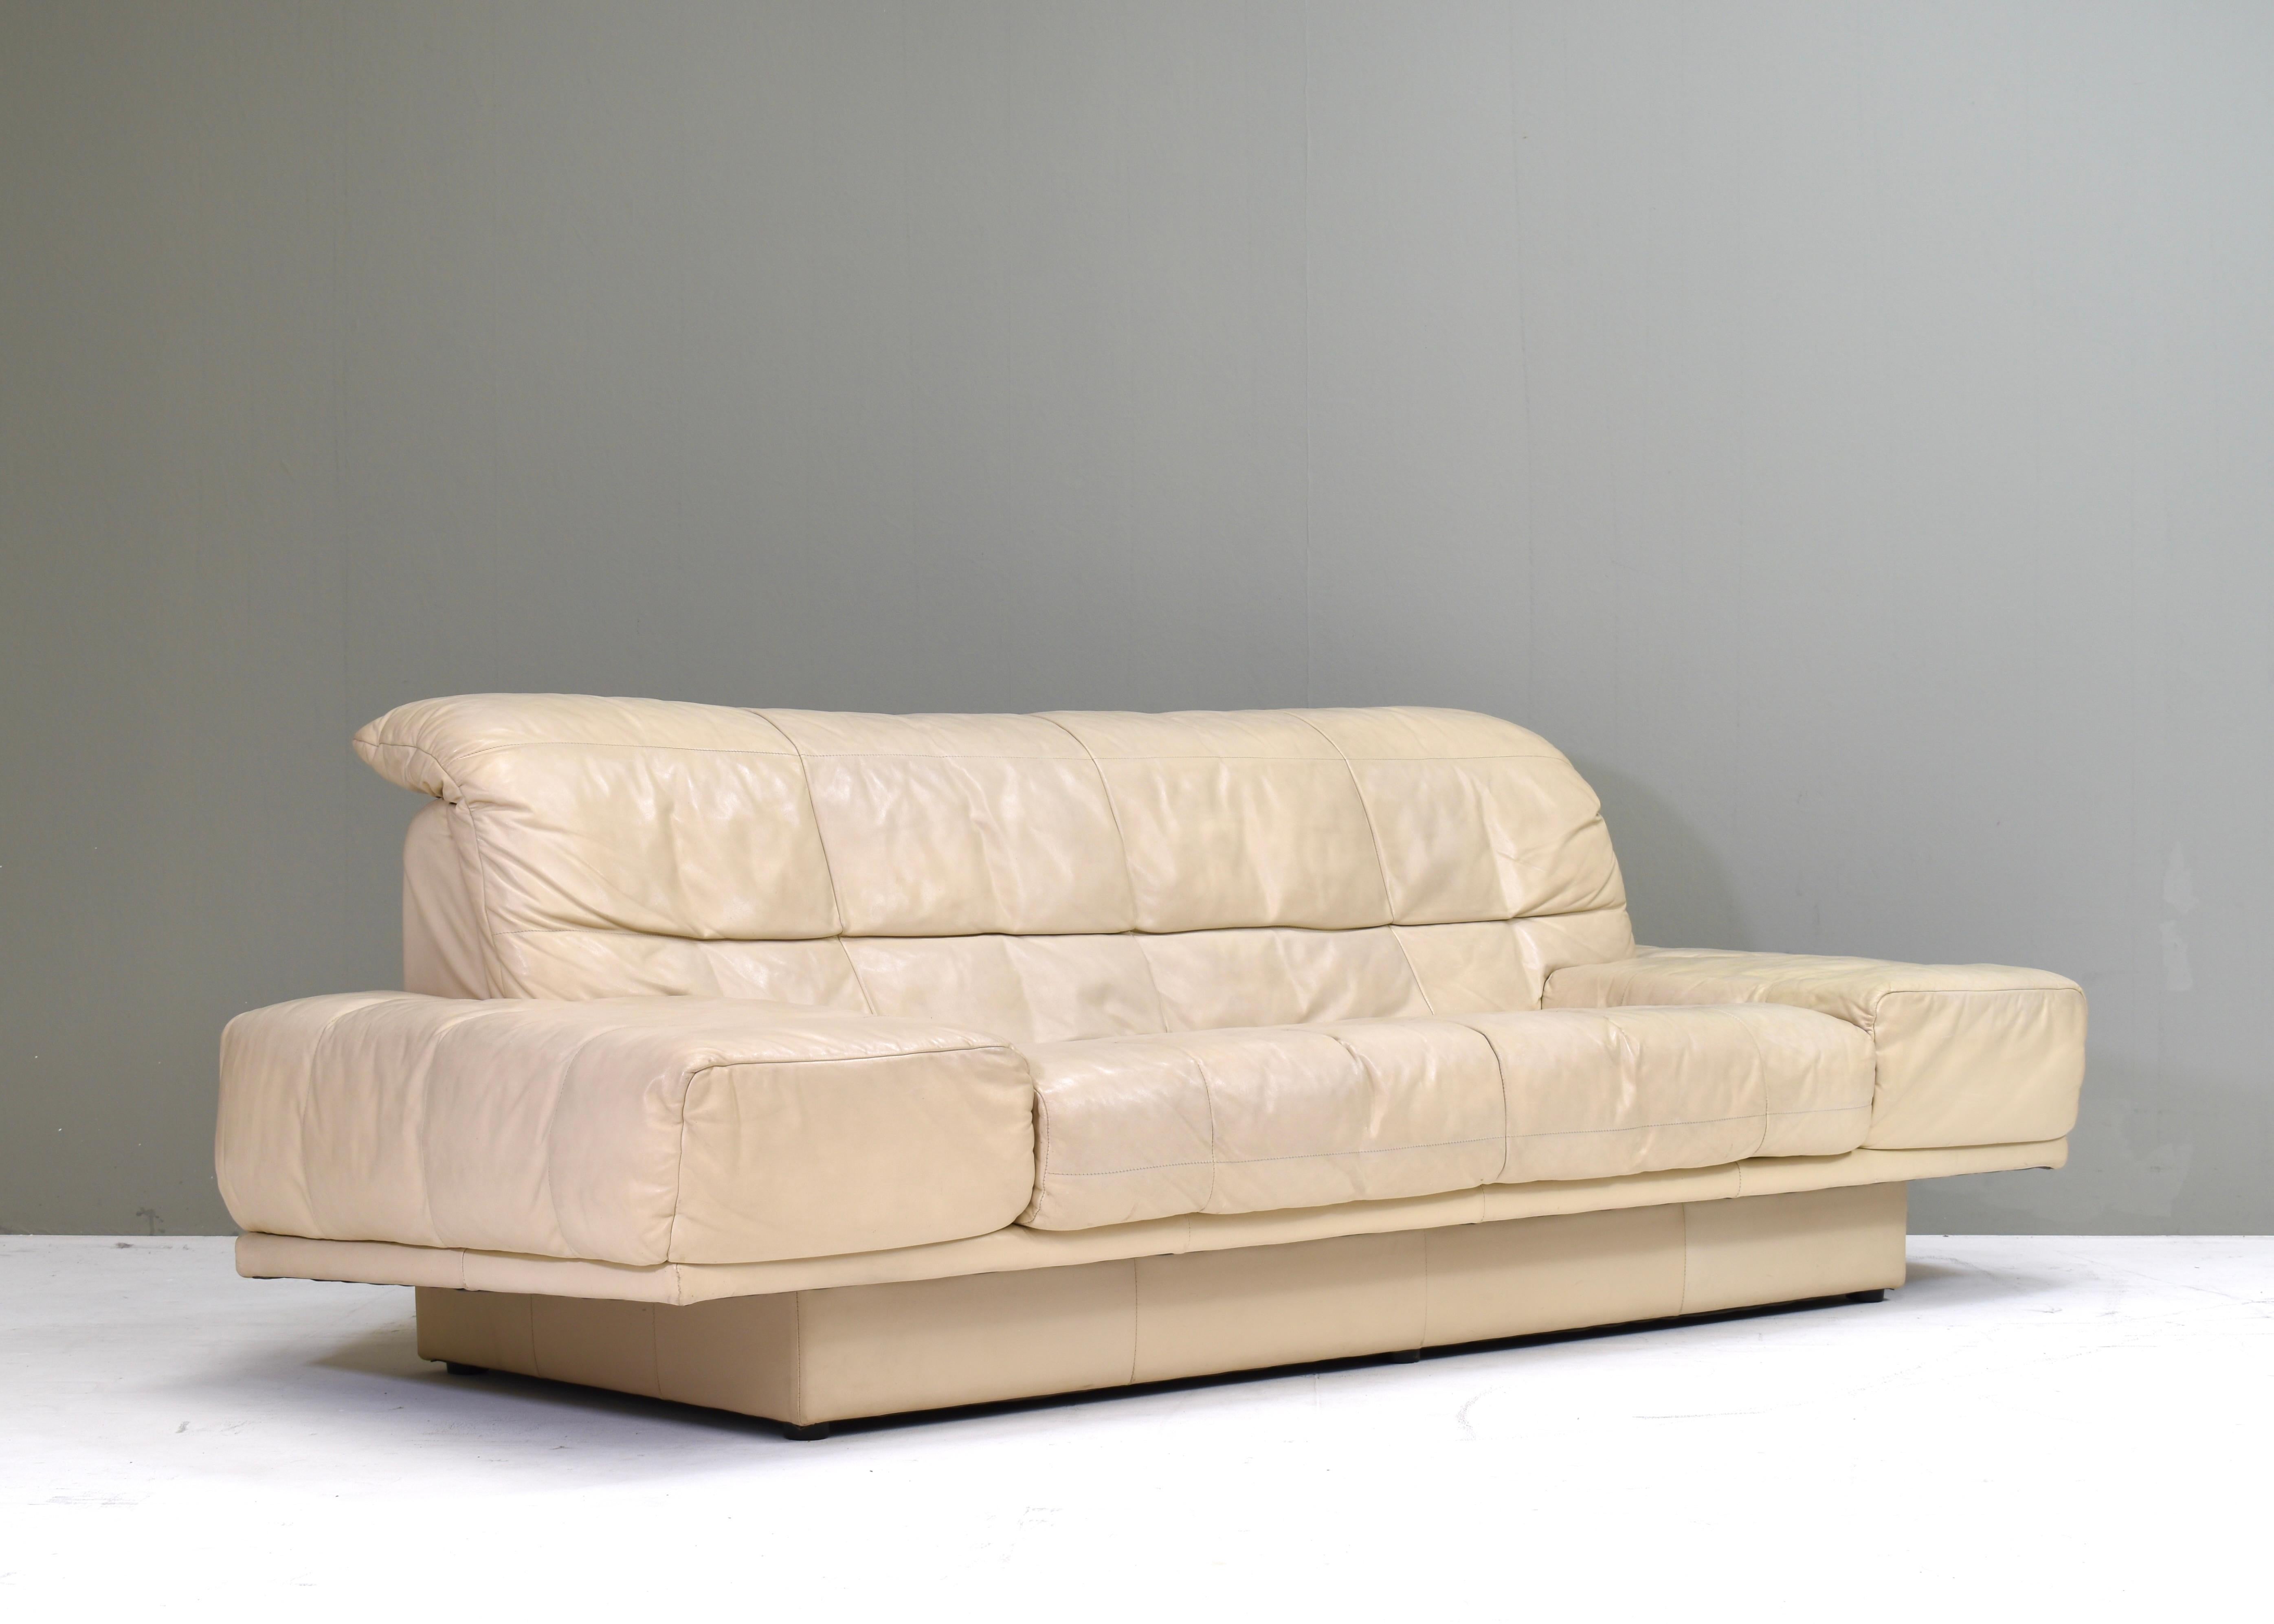 Rolf Benz 3-seat sofa in ivory colored leather. Also sold separate.

Designer: Unknown
Manufacturer: Rolf Benz
Country: Germany
Model: Sofa
Design period: circa 1980-90
Date of manufacturing: circa 1980-90
Size wdh:
3 seat sofa: 233x87x72 seat